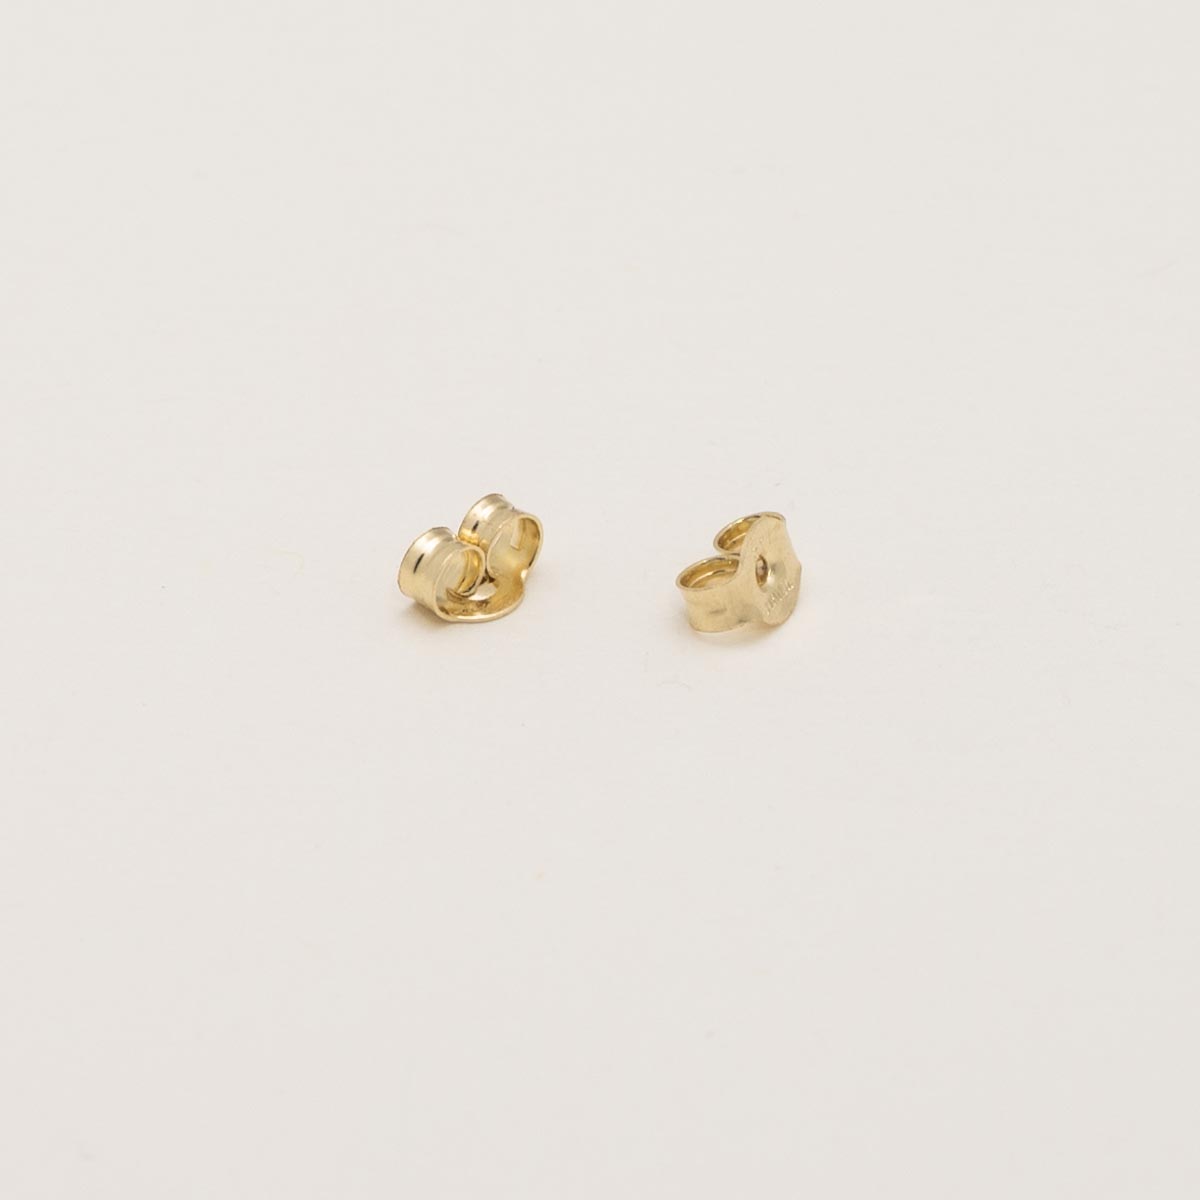 Cultured Freshwater Pearl Drop Earrings in 14kt Yellow Gold (6mm pearls)